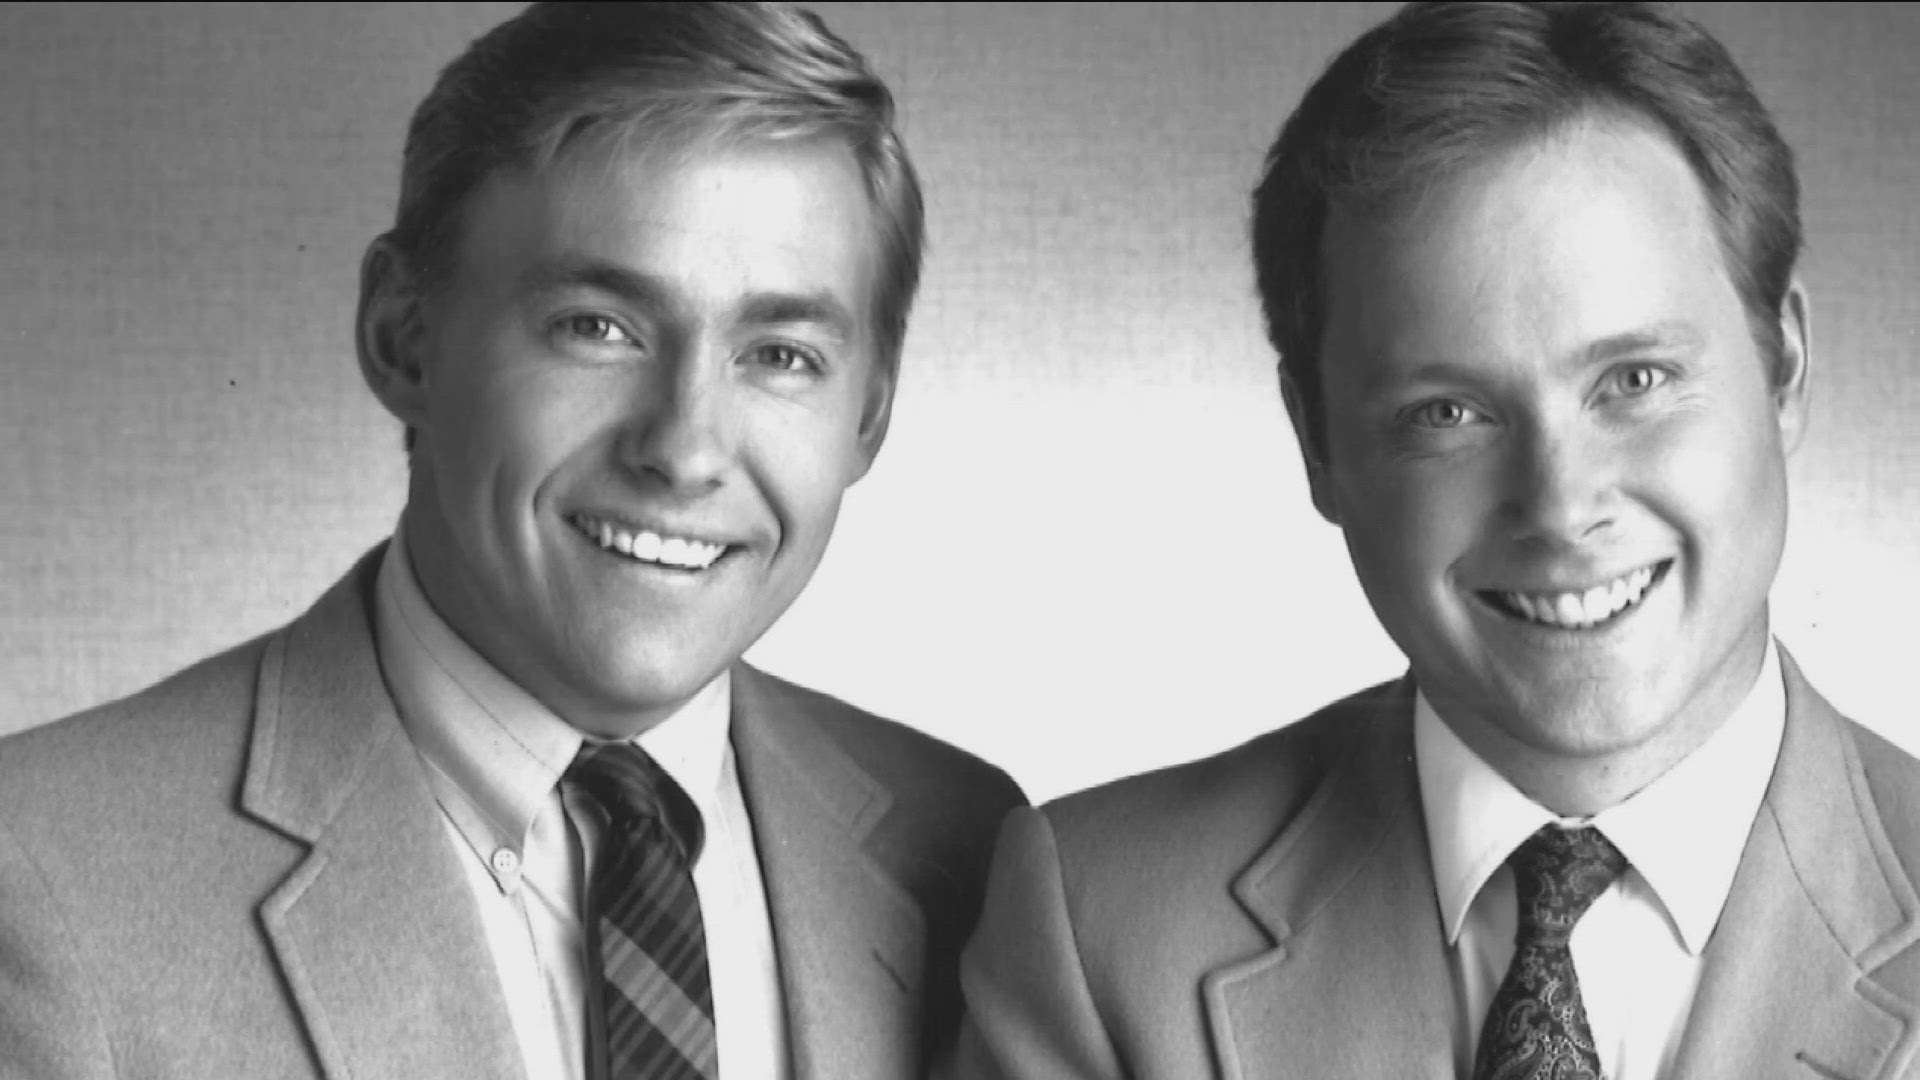 Rick has been in broadcasting since 1975. He's been bringing viewers his daily forecast on KTVB for almost 42 years.